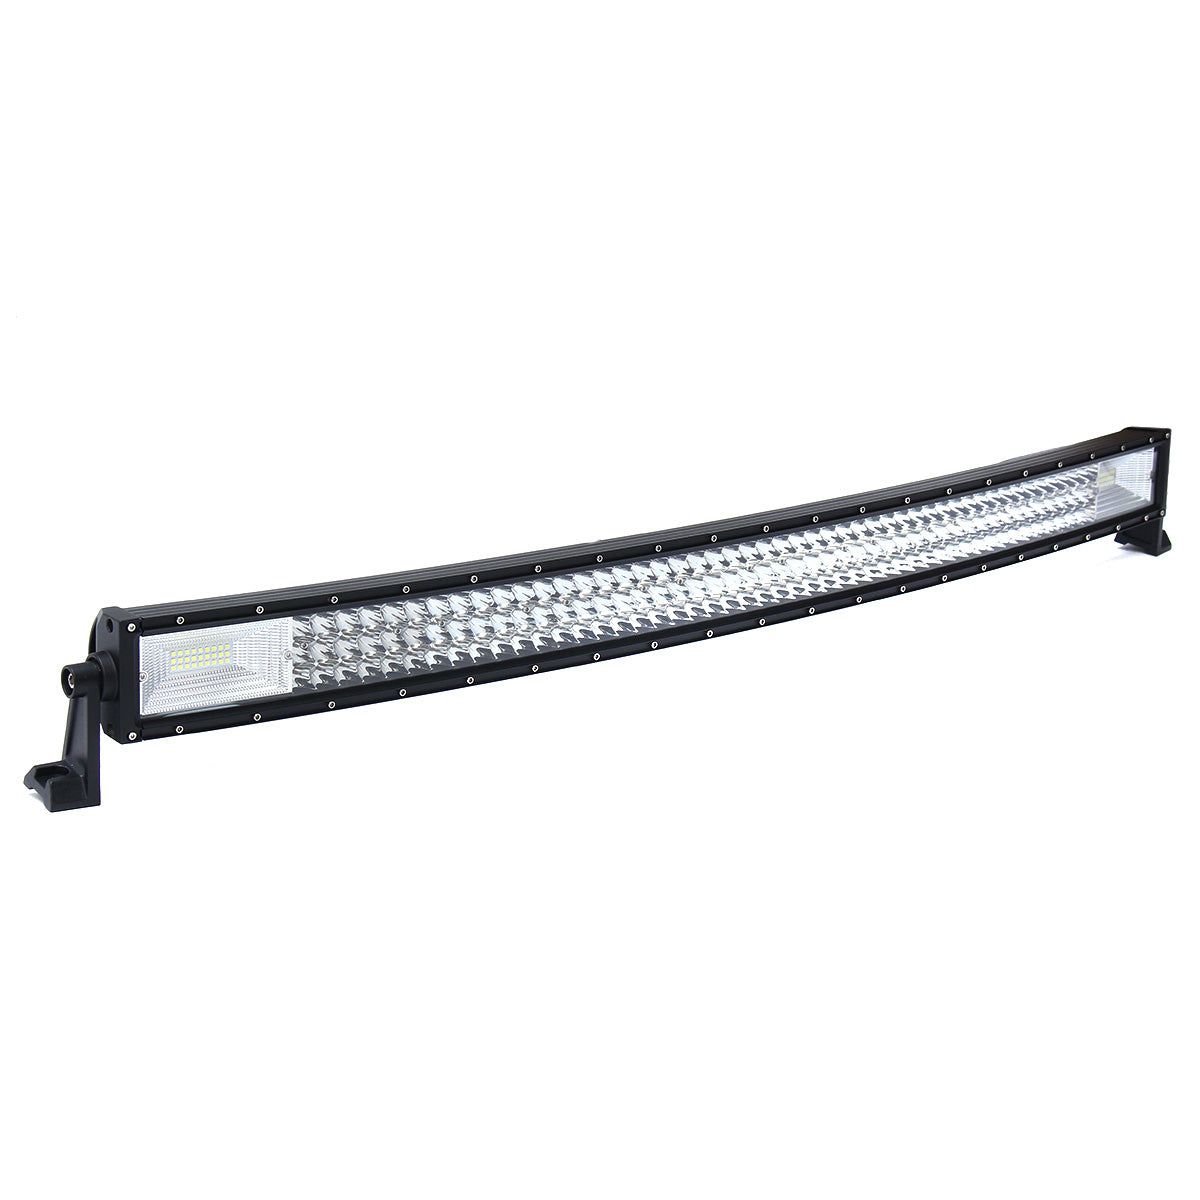 Lavender 42Inch 7D LED Work Light Bars TRI-ROW Curved Combo Beam 594W 59400LM for Off Road Boat Truck SUV